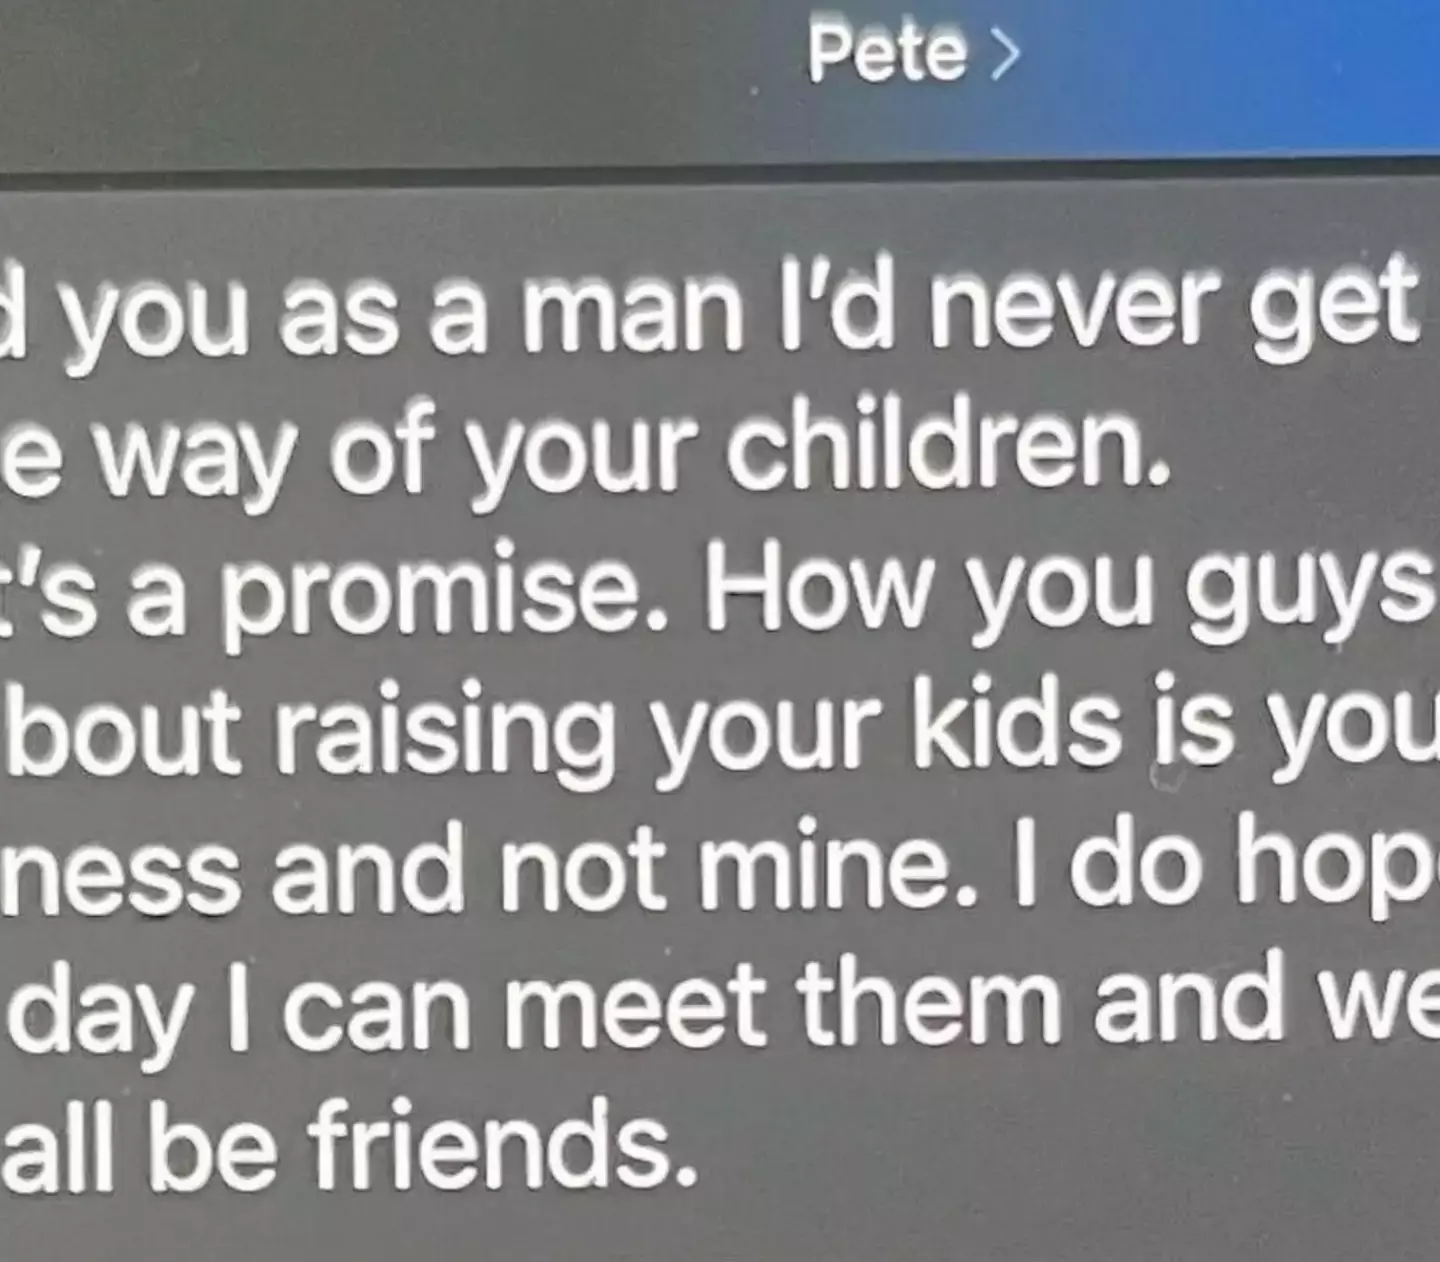 The alleged text from Pete.